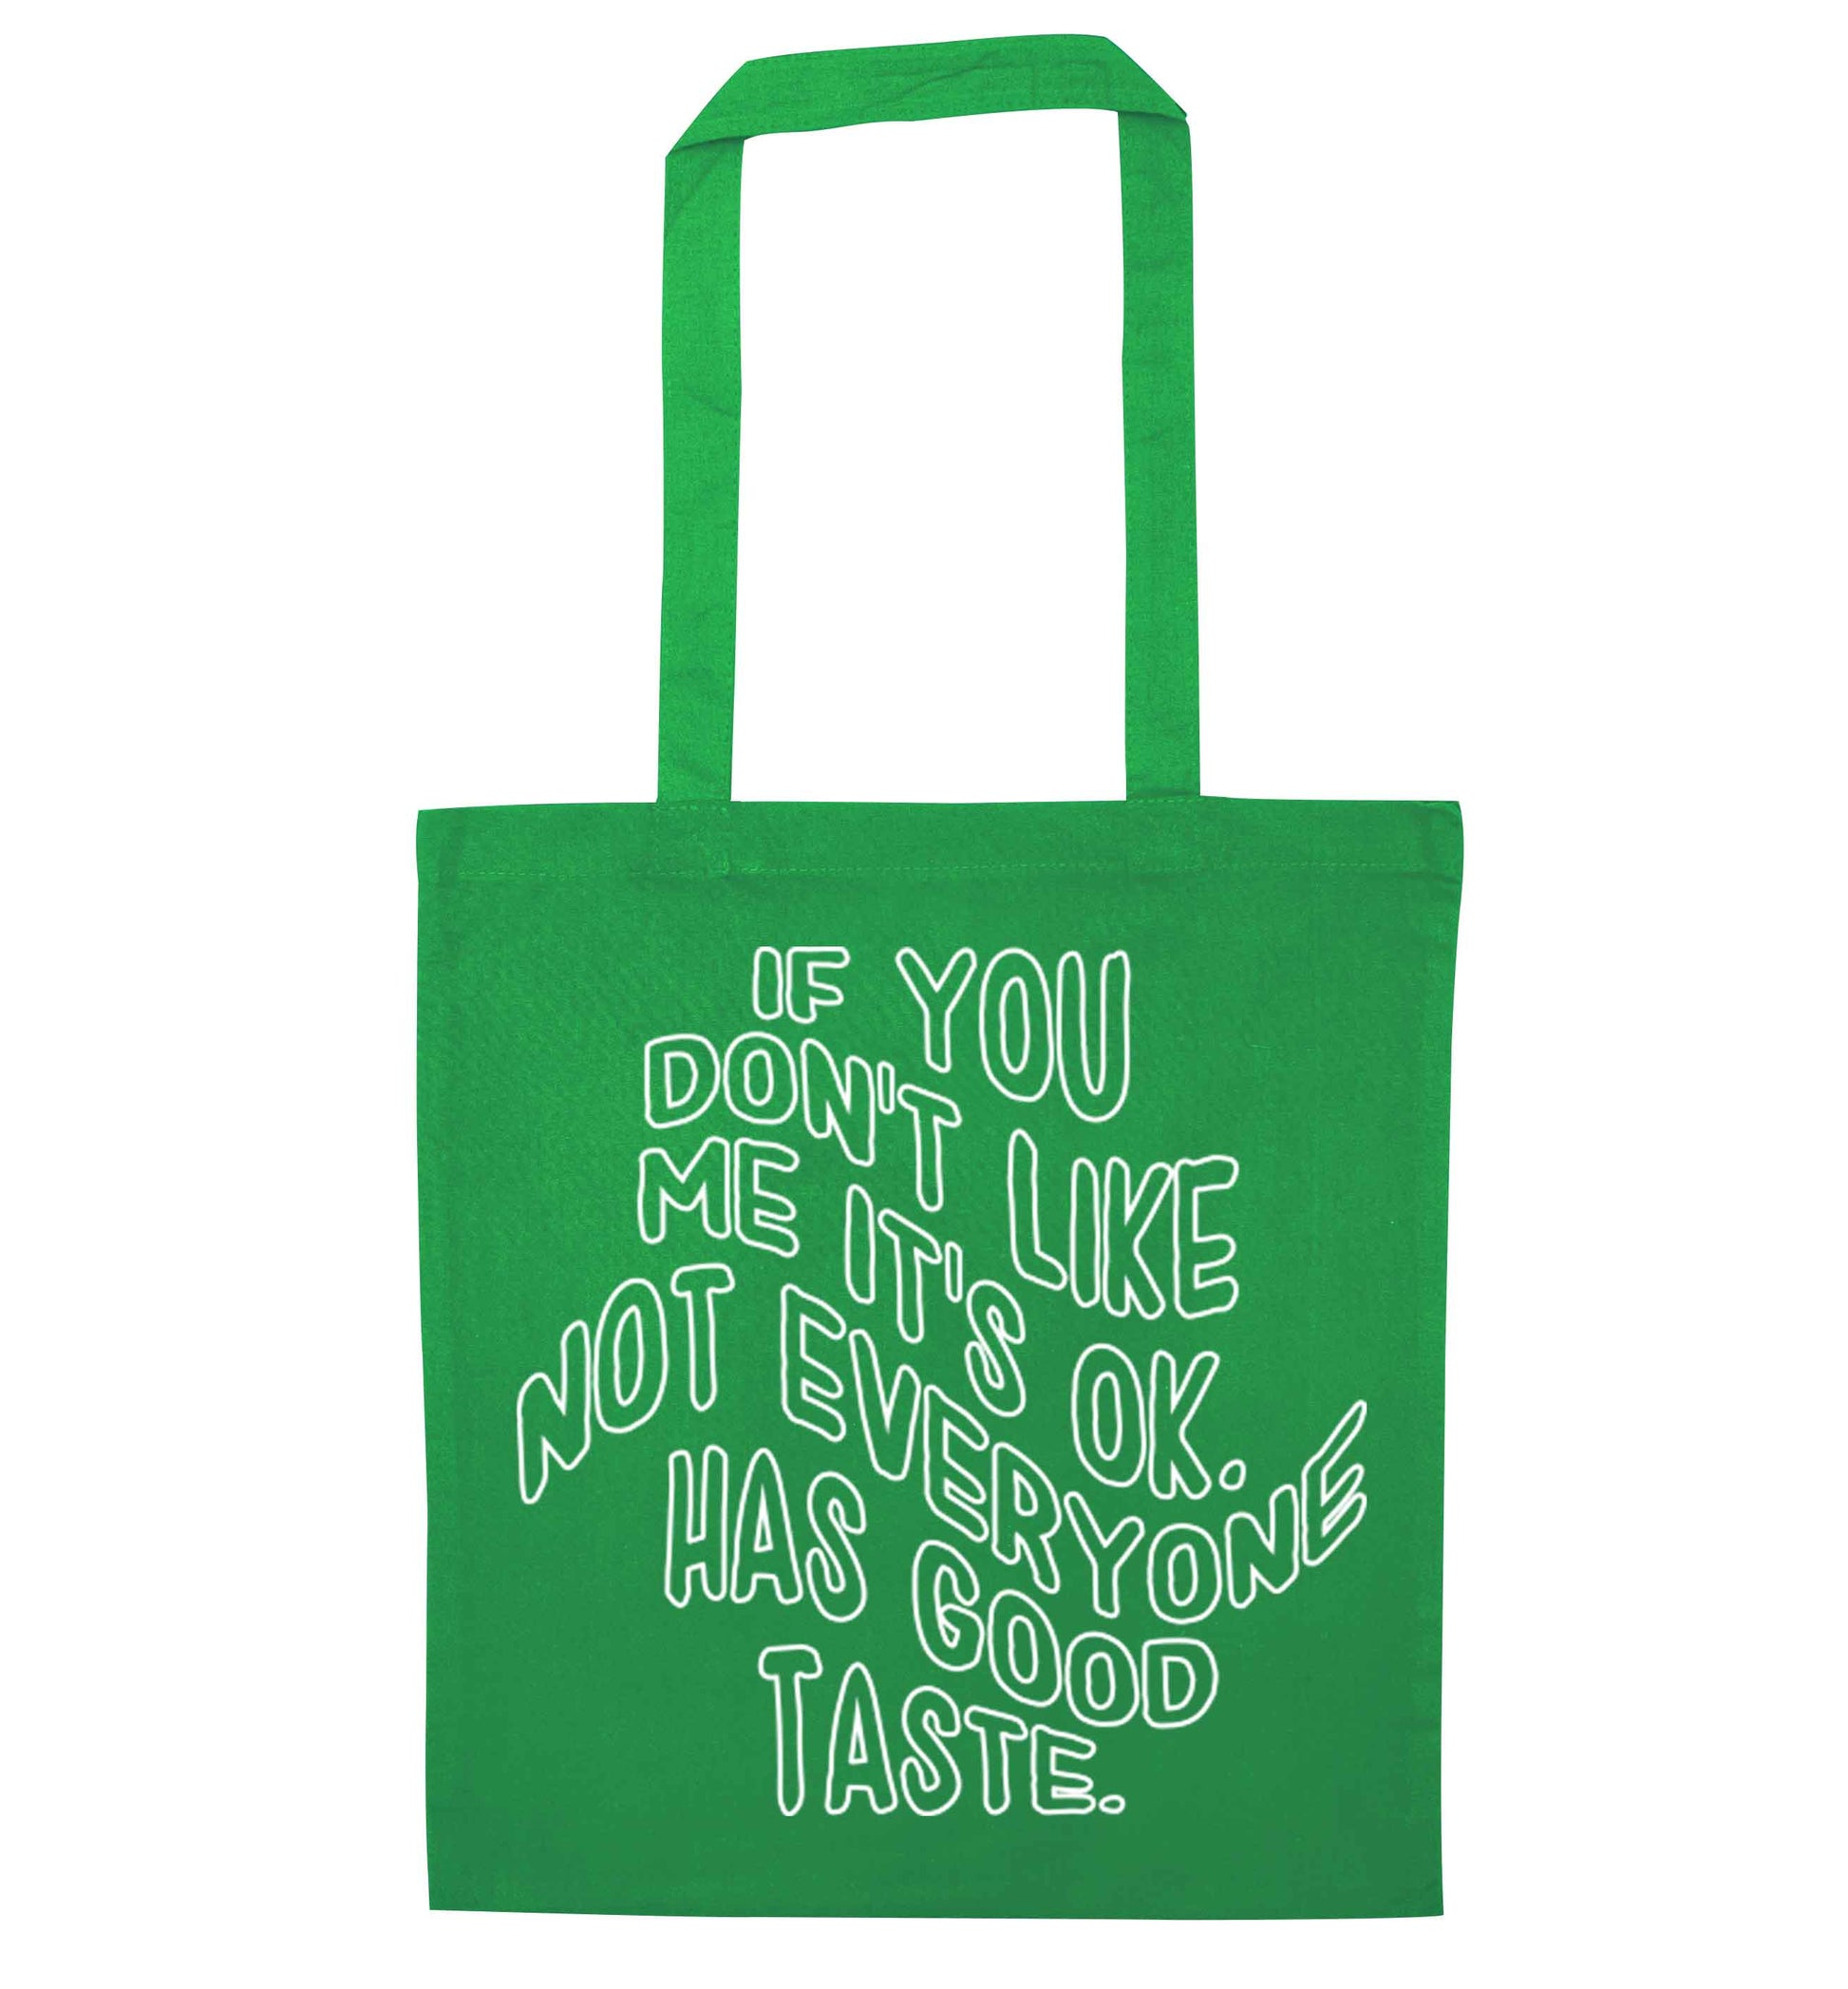 If you don't like me it's ok not everyone has good taste green tote bag